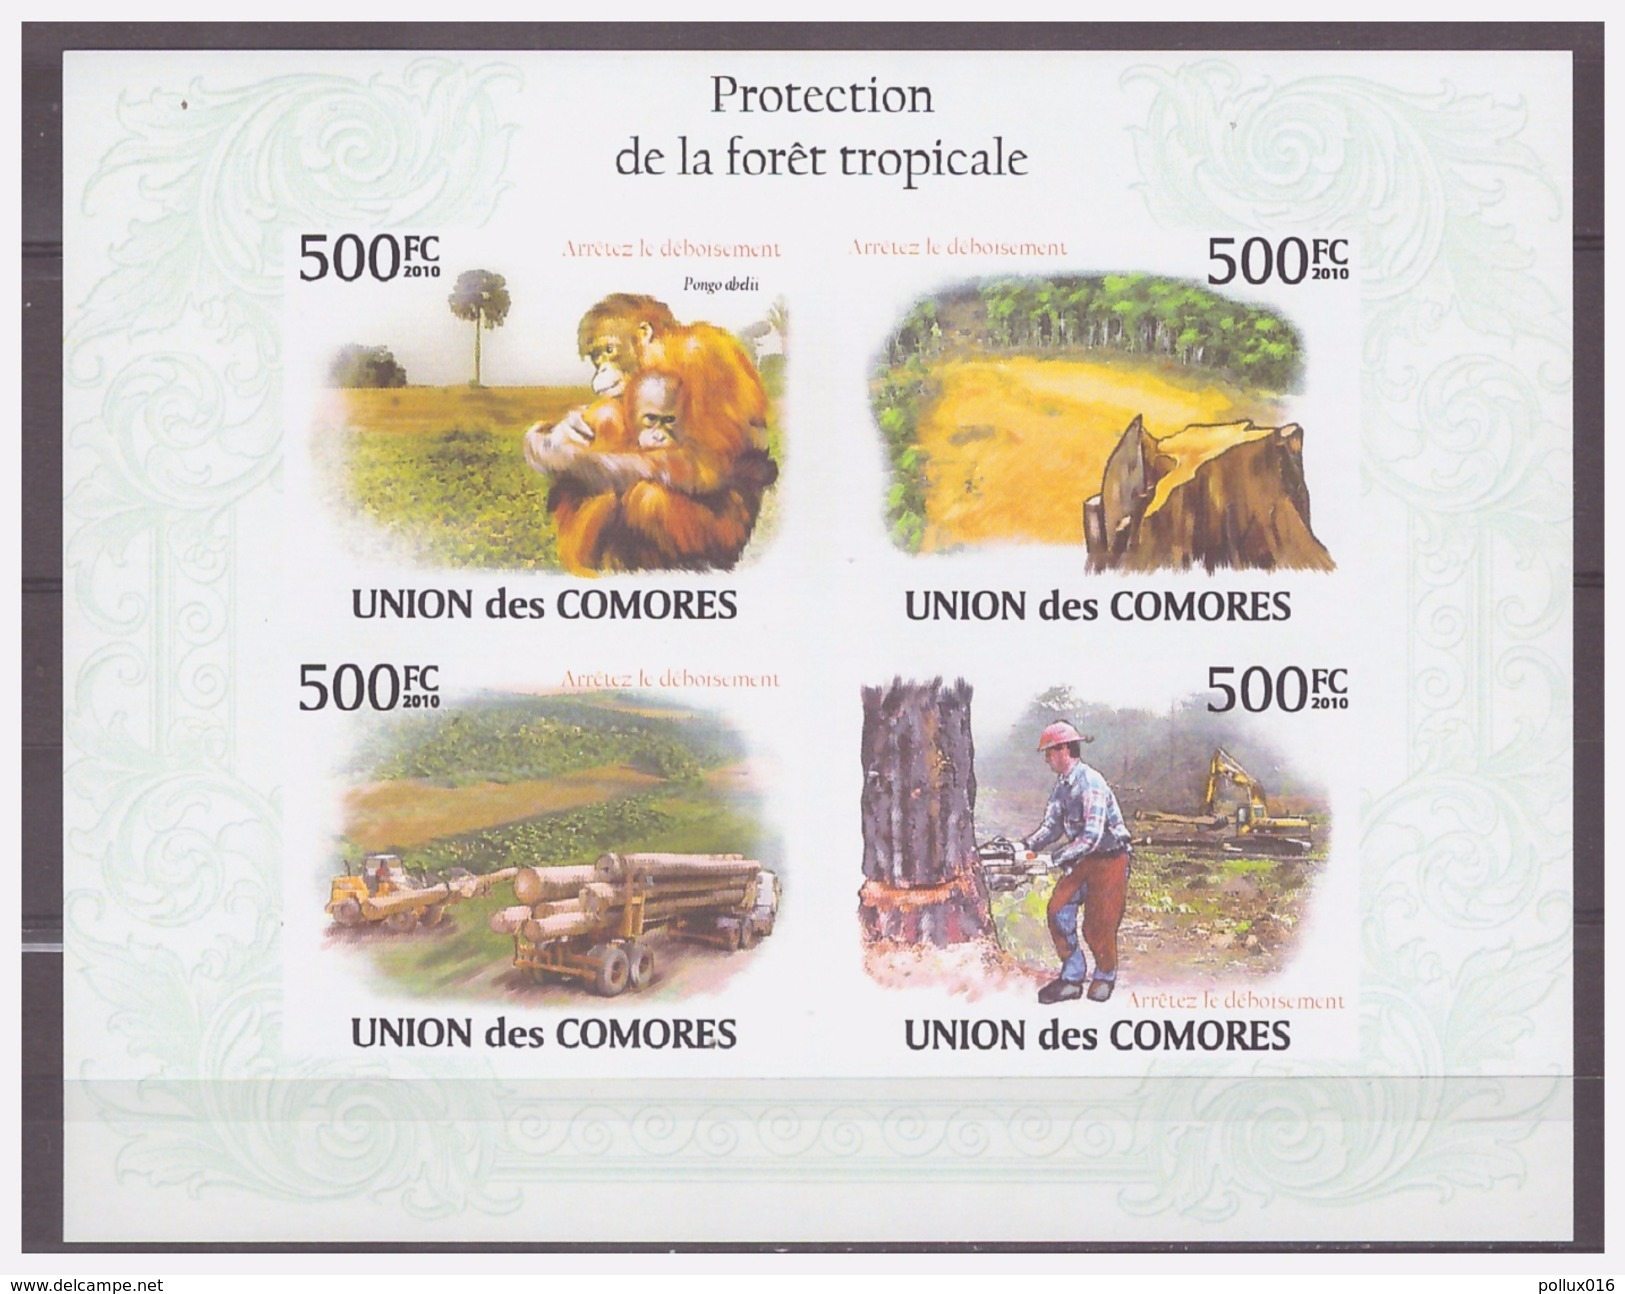 0170 Comores 2010 Protection Tropical Forrest Tree Ape Monkey S/S MNH Imperf - Milieubescherming & Klimaat